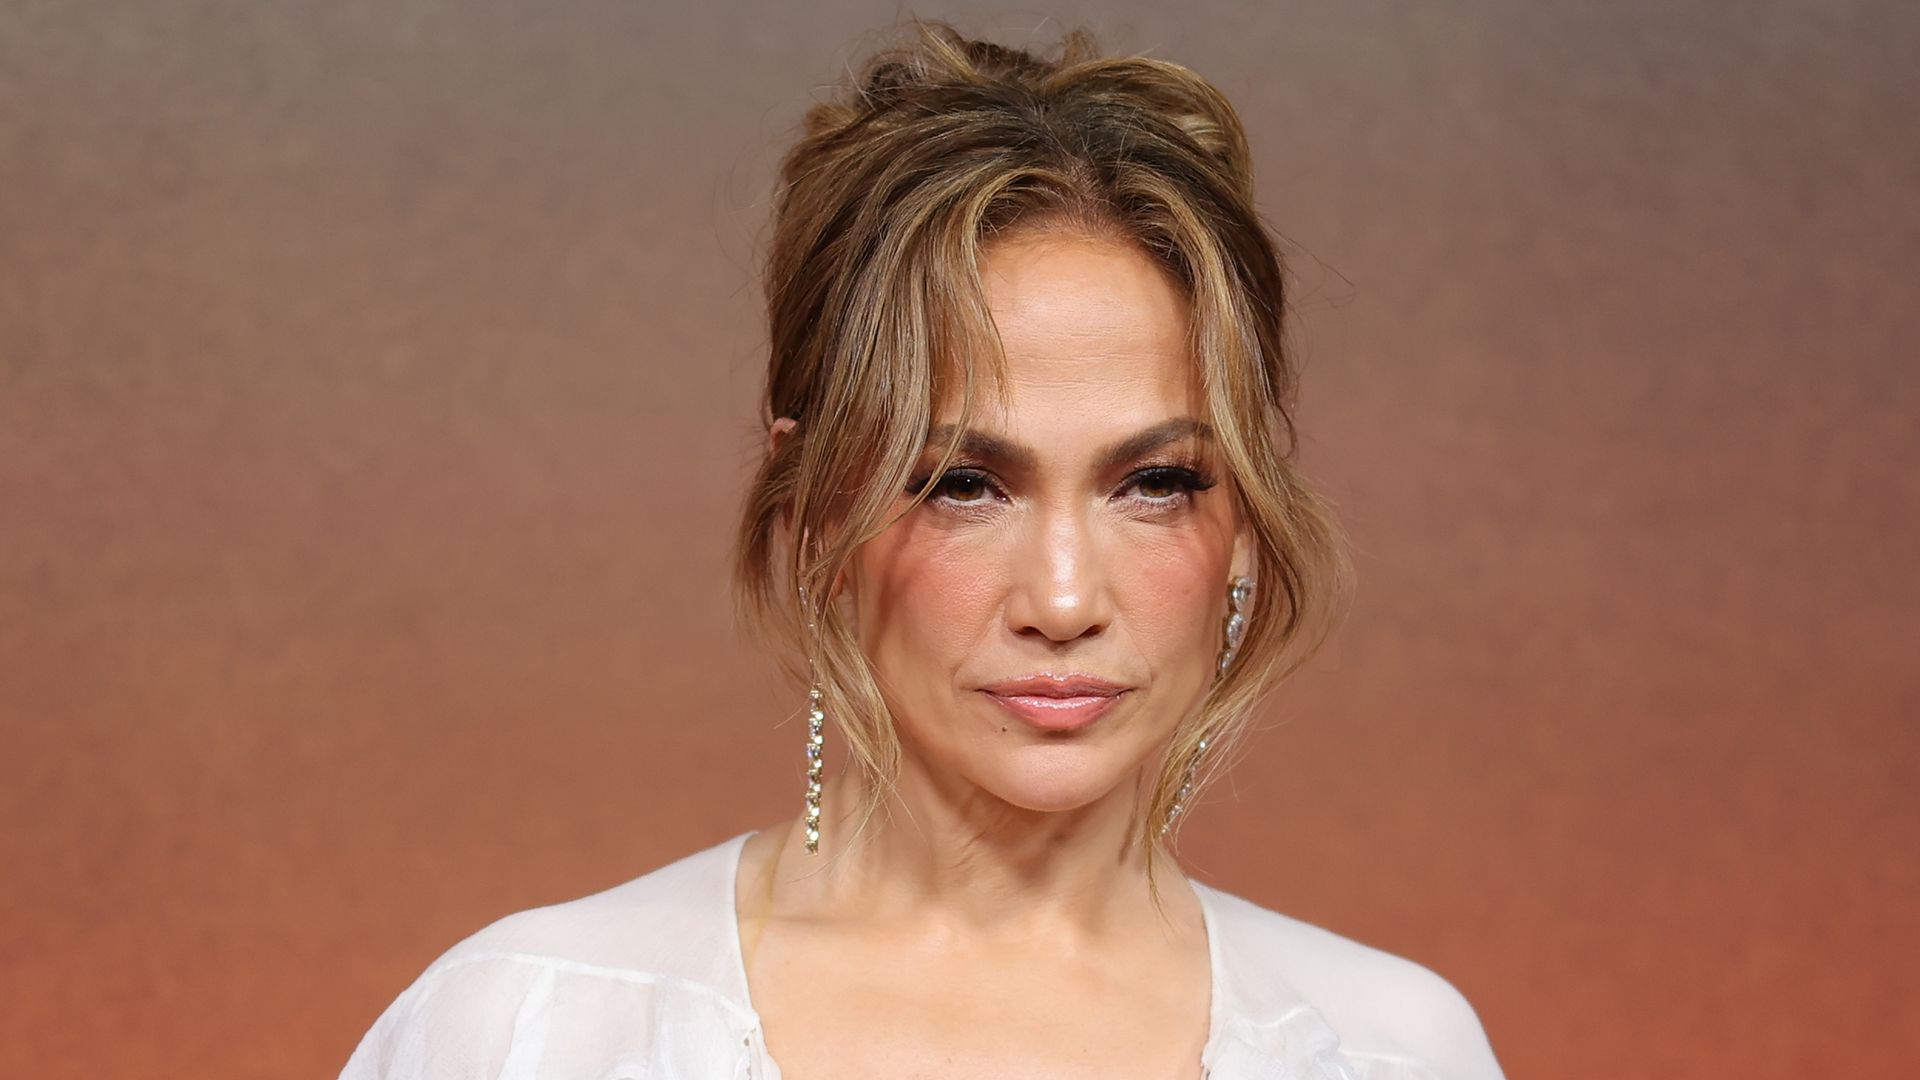 Jennifer Lopez cancels tour to 'be with her family' amid Ben Affleck divorce reports